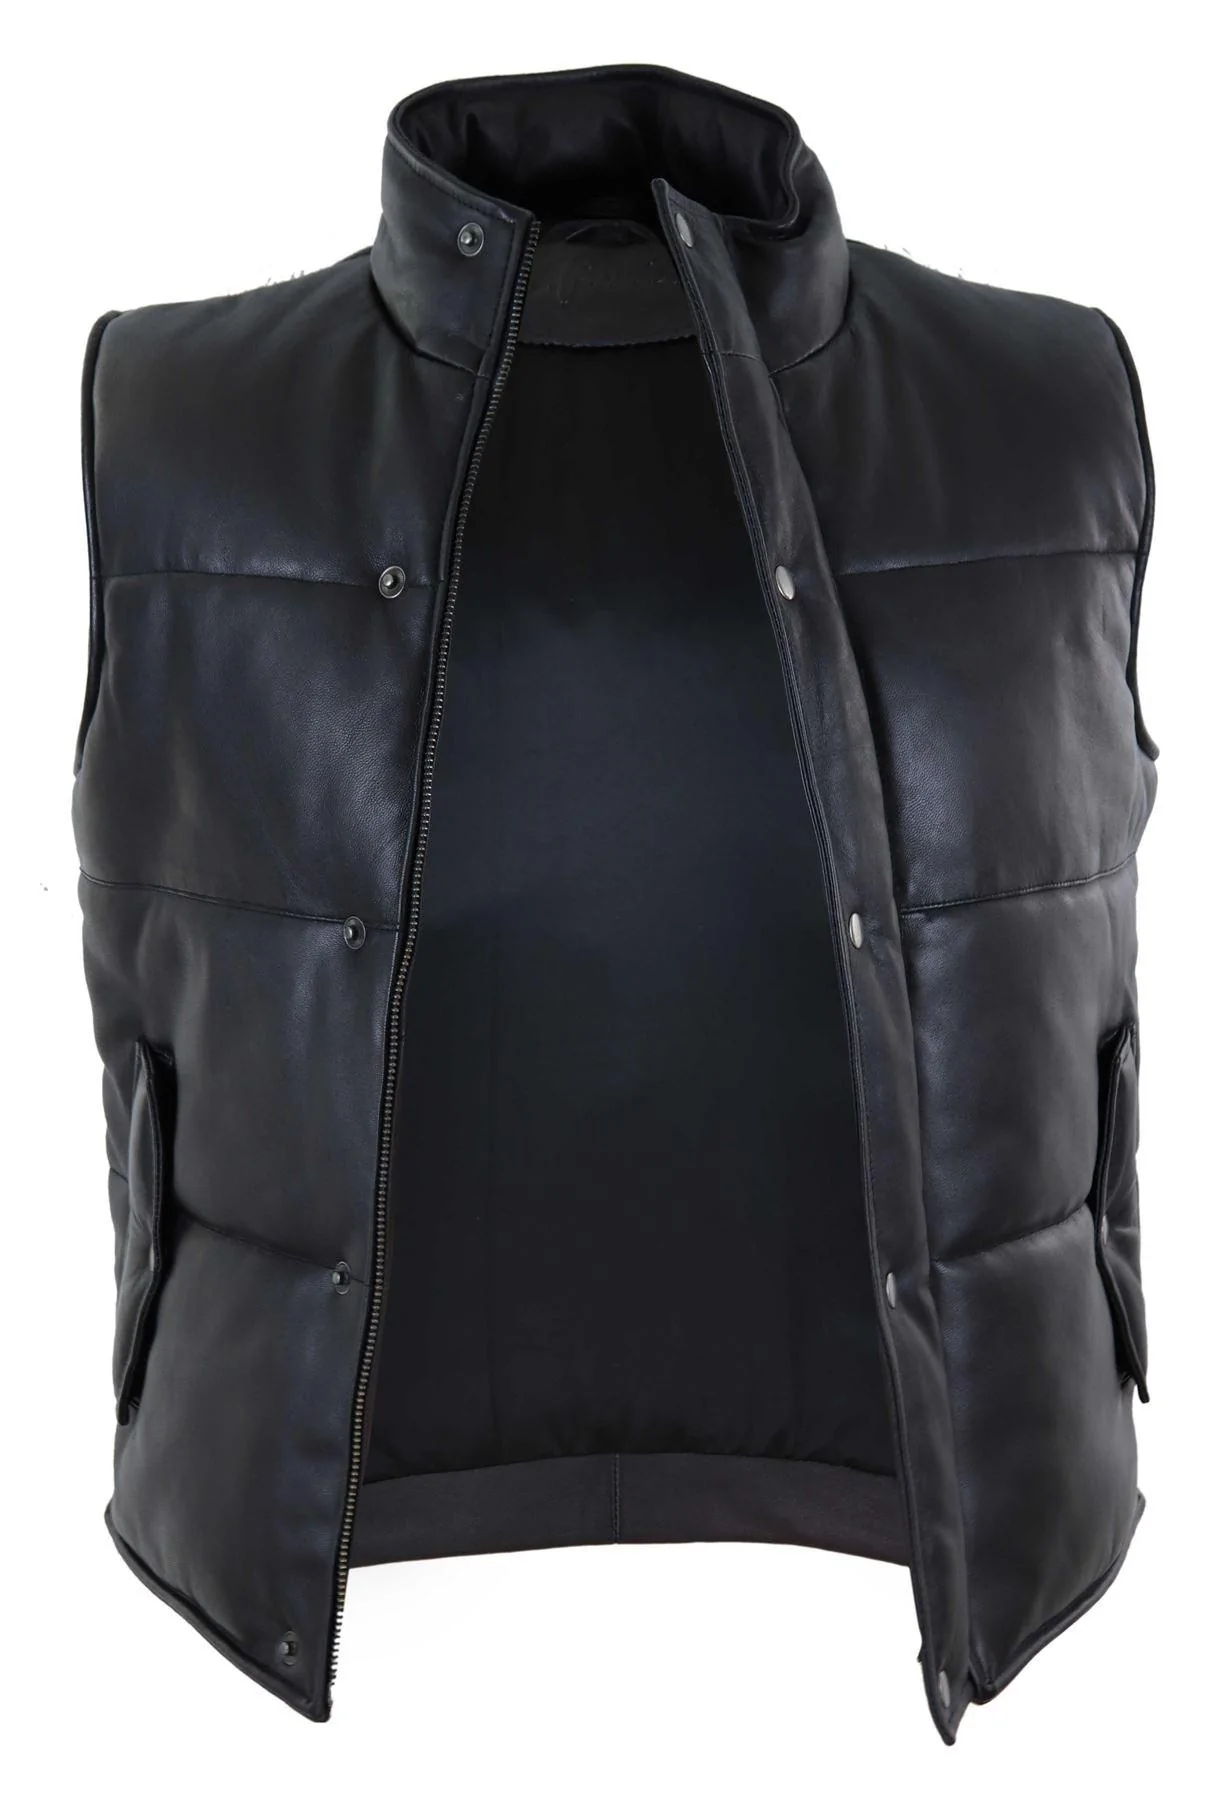 Mens Real Leather Waistcoat Gilet Quilted Puffer Design Warm Zip Casual Black